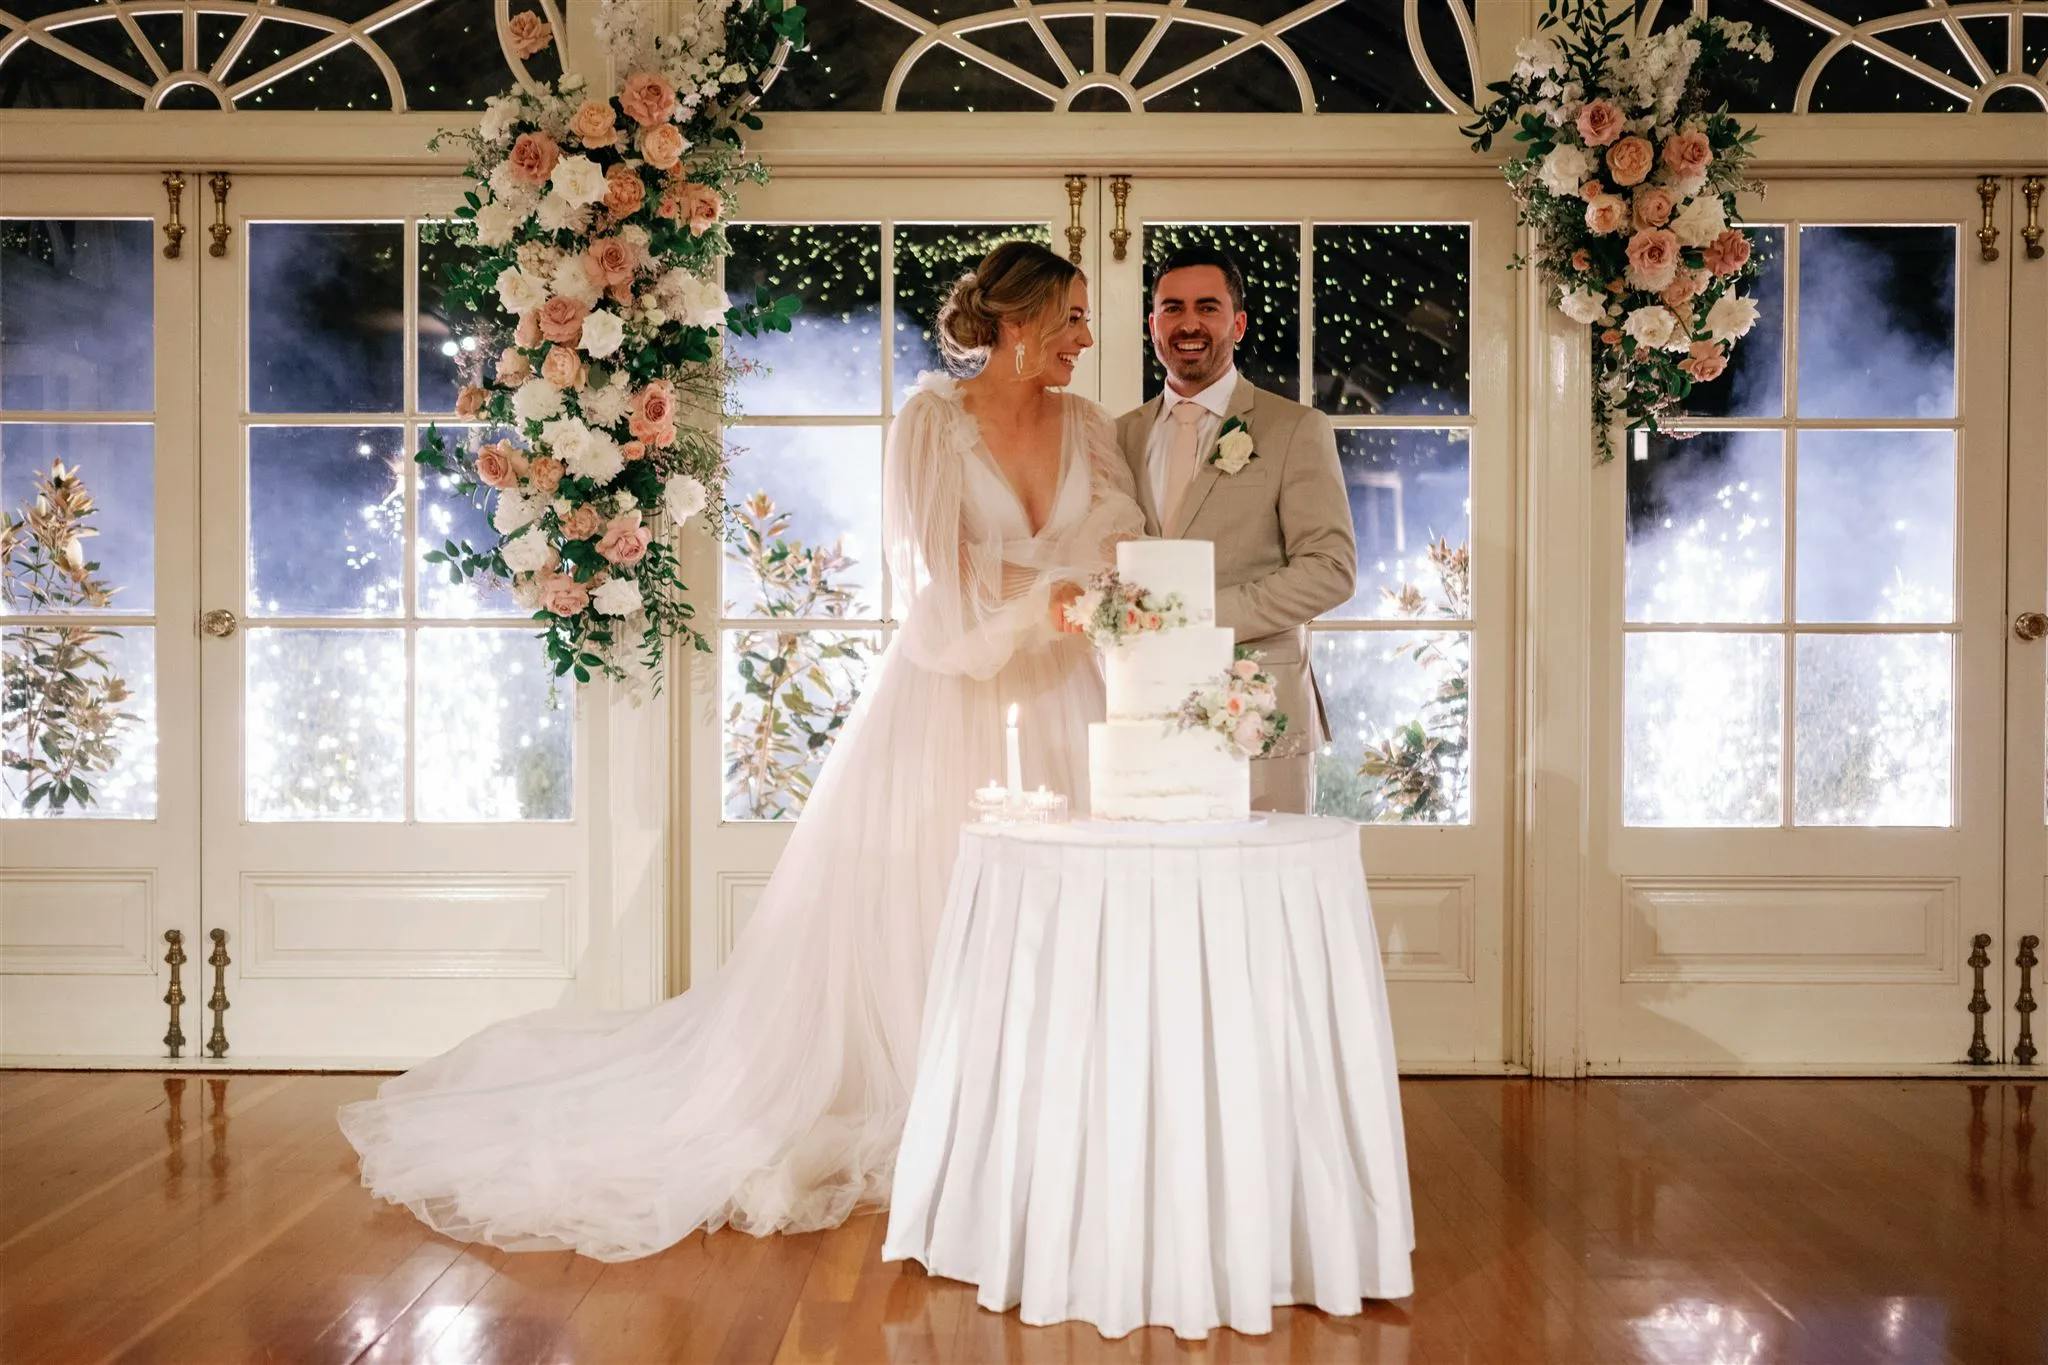 A bride and groom are standing behind a table with a wedding cake in an elegantly decorated room. They are smiling, and the bride is wearing a long white dress while the groom is in a beige suit. The background features large windows with floral arrangements and twinkling lights.